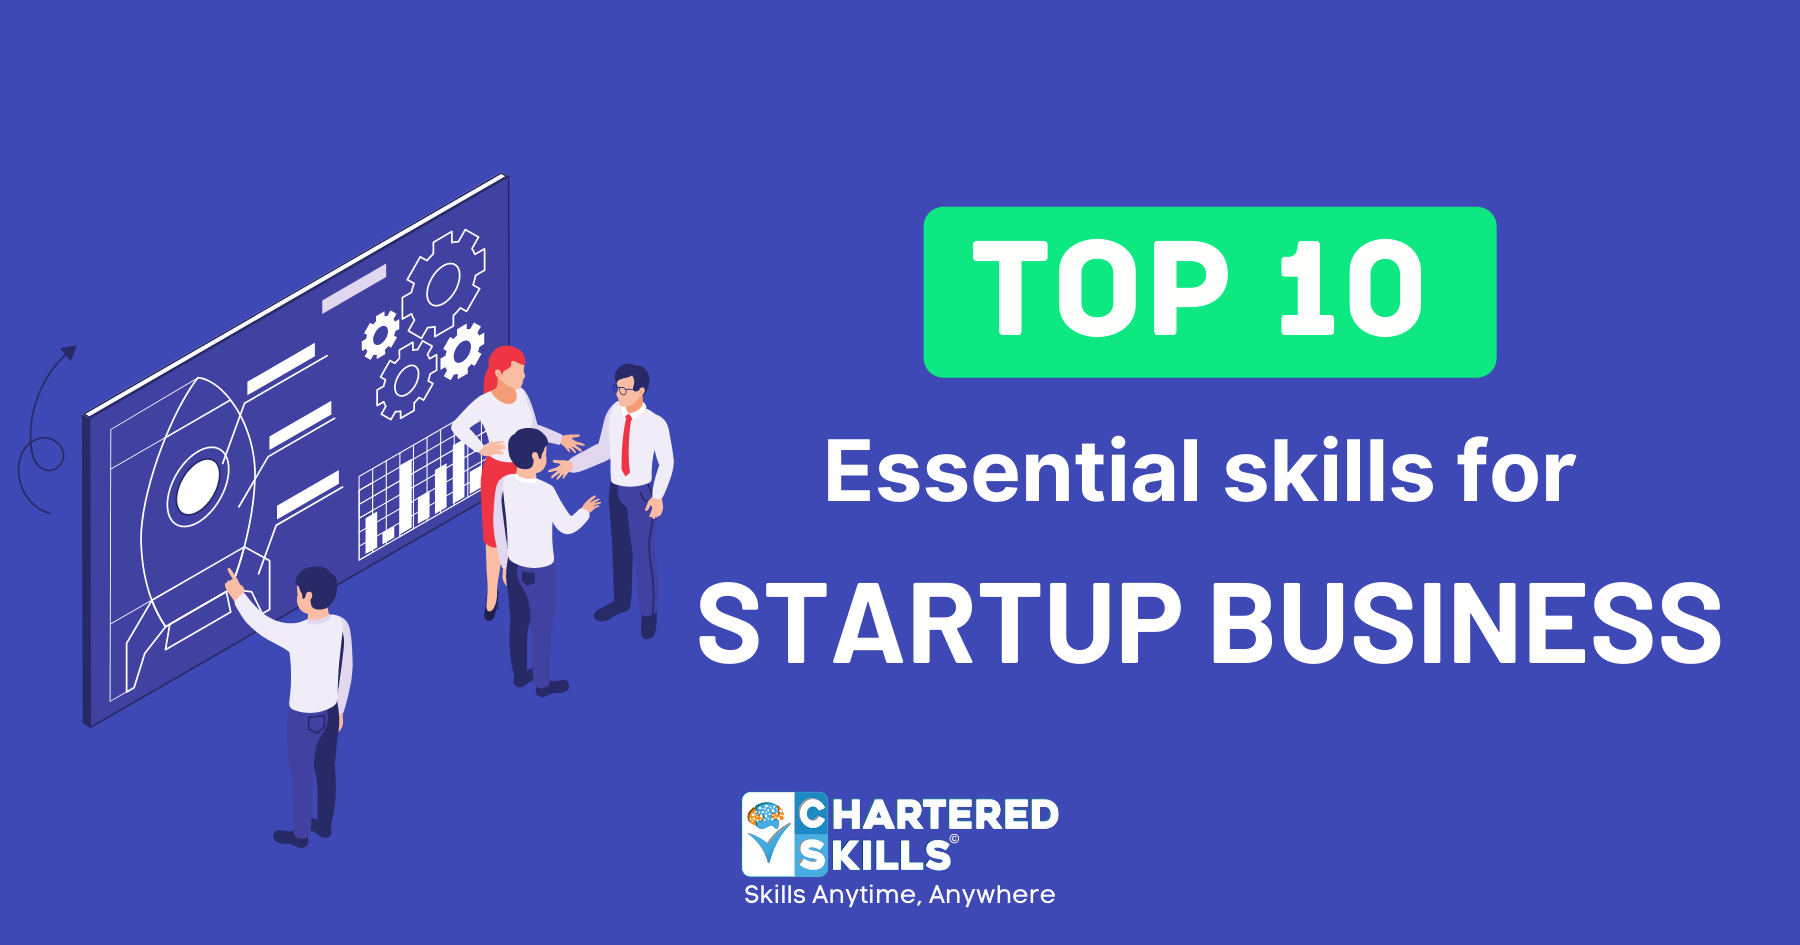 10 Essential skills for startup business